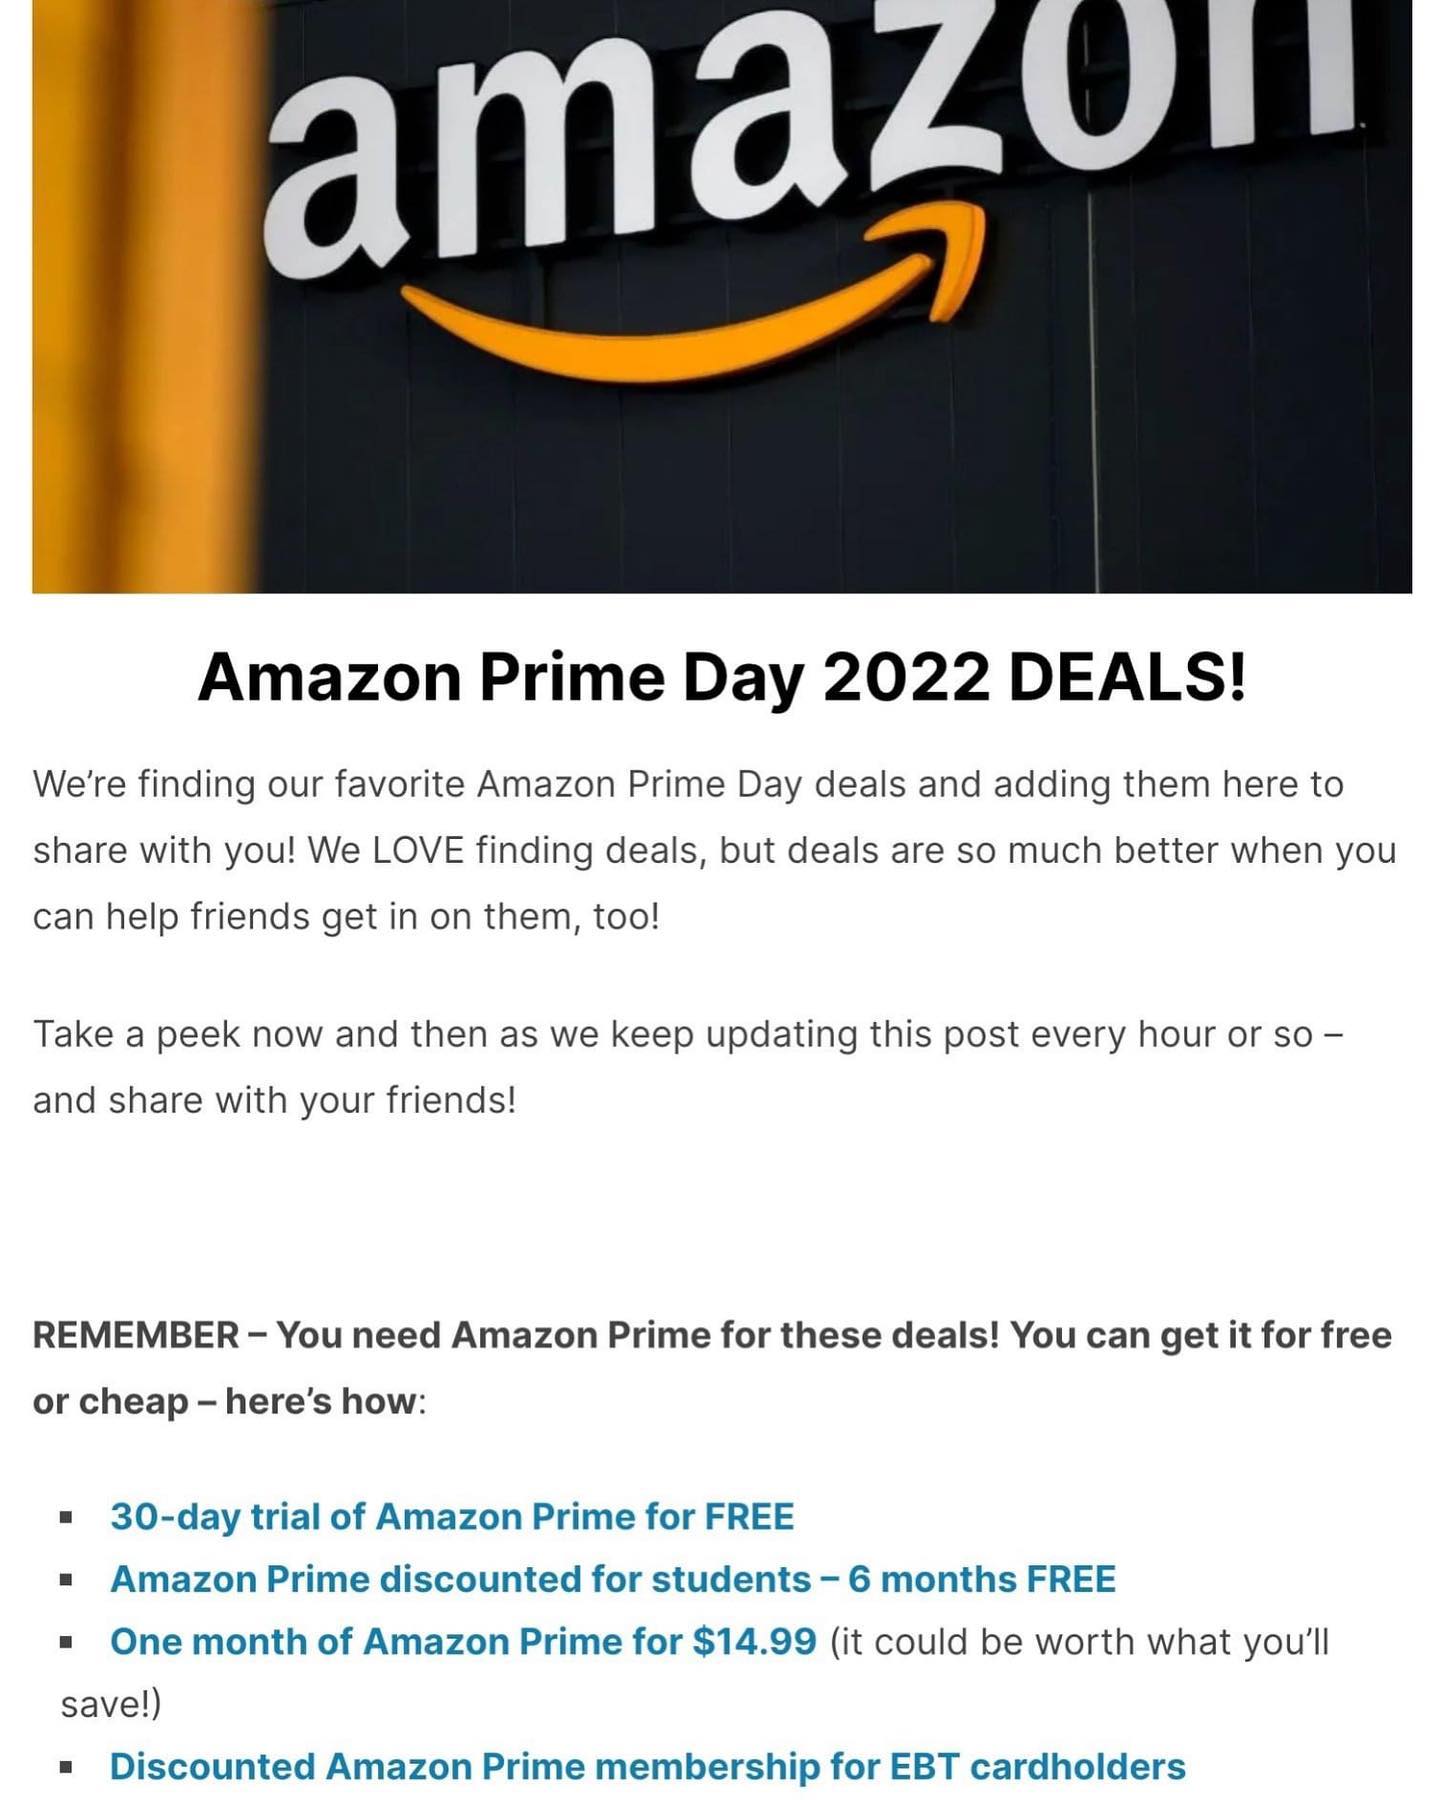 Don't have Amazon Prime?
Check out our Amazon Prime Day Deals post that includes how to get prime for free or cheap!
Link in stories ⬆️

#amazon #primeday #primedaydeals #primeday2022 #amazonfinds #amazondeals #primedeals #amazonmusthaves #amazonprime